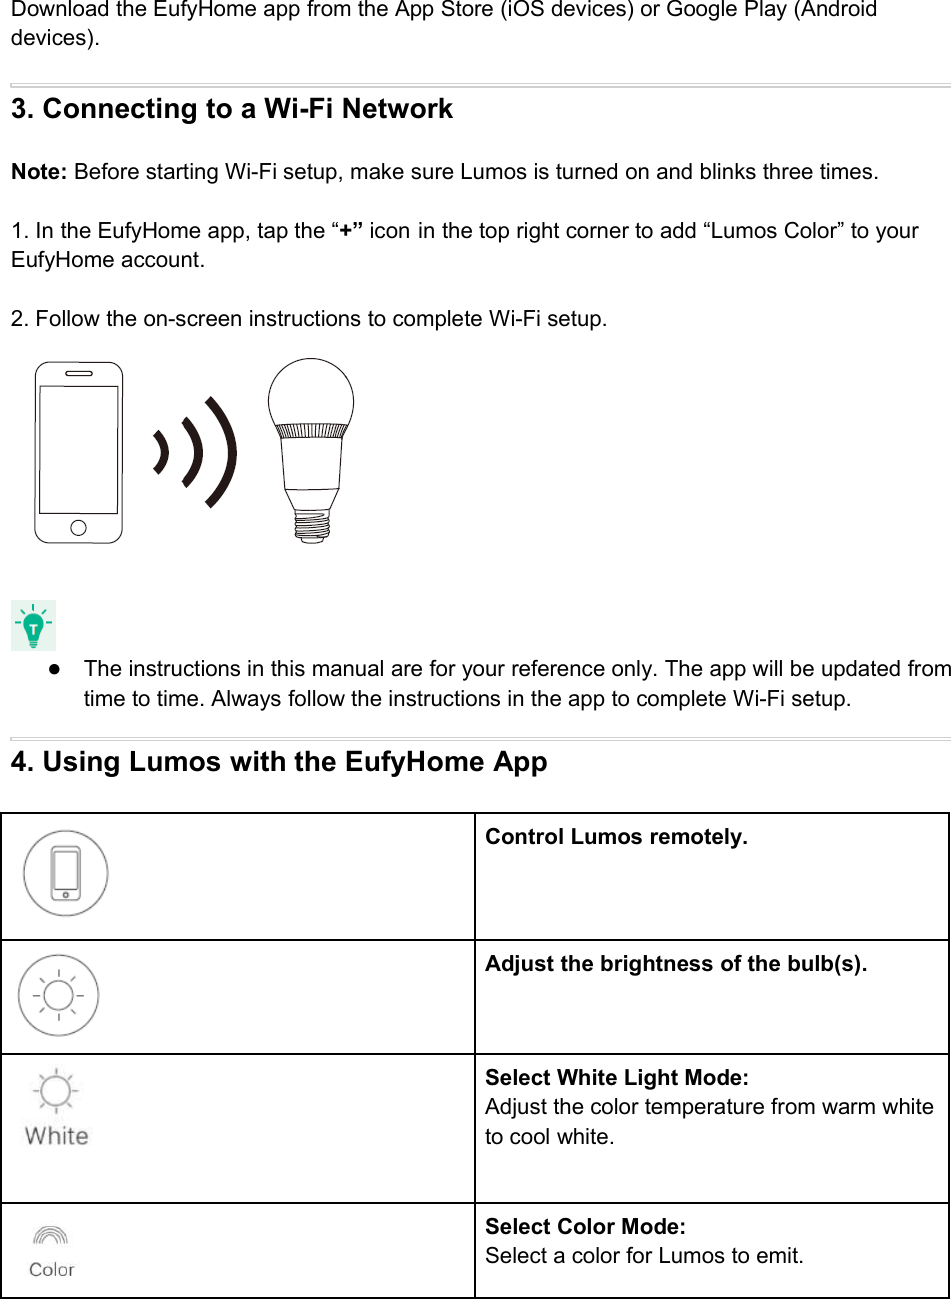 Download the EufyHome app from the App Store (iOS devices) or Google Play (Androiddevices).3. Connecting to a Wi-Fi NetworkNote: Before starting Wi-Fi setup, make sure Lumos is turned on and blinks three times.1. In the EufyHome app, tap the “+” icon in the top right corner to add “Lumos Color” to yourEufyHome account.2. Follow the on-screen instructions to complete Wi-Fi setup.●The instructions in this manual are for your reference only. The app will be updated fromtime to time. Always follow the instructions in the app to complete Wi-Fi setup.4. Using Lumos with the EufyHome AppControl Lumos remotely.Adjust the brightness of the bulb(s).Select White Light Mode:Adjust the color temperature from warm whiteto cool white.Select Color Mode:Select a color for Lumos to emit.